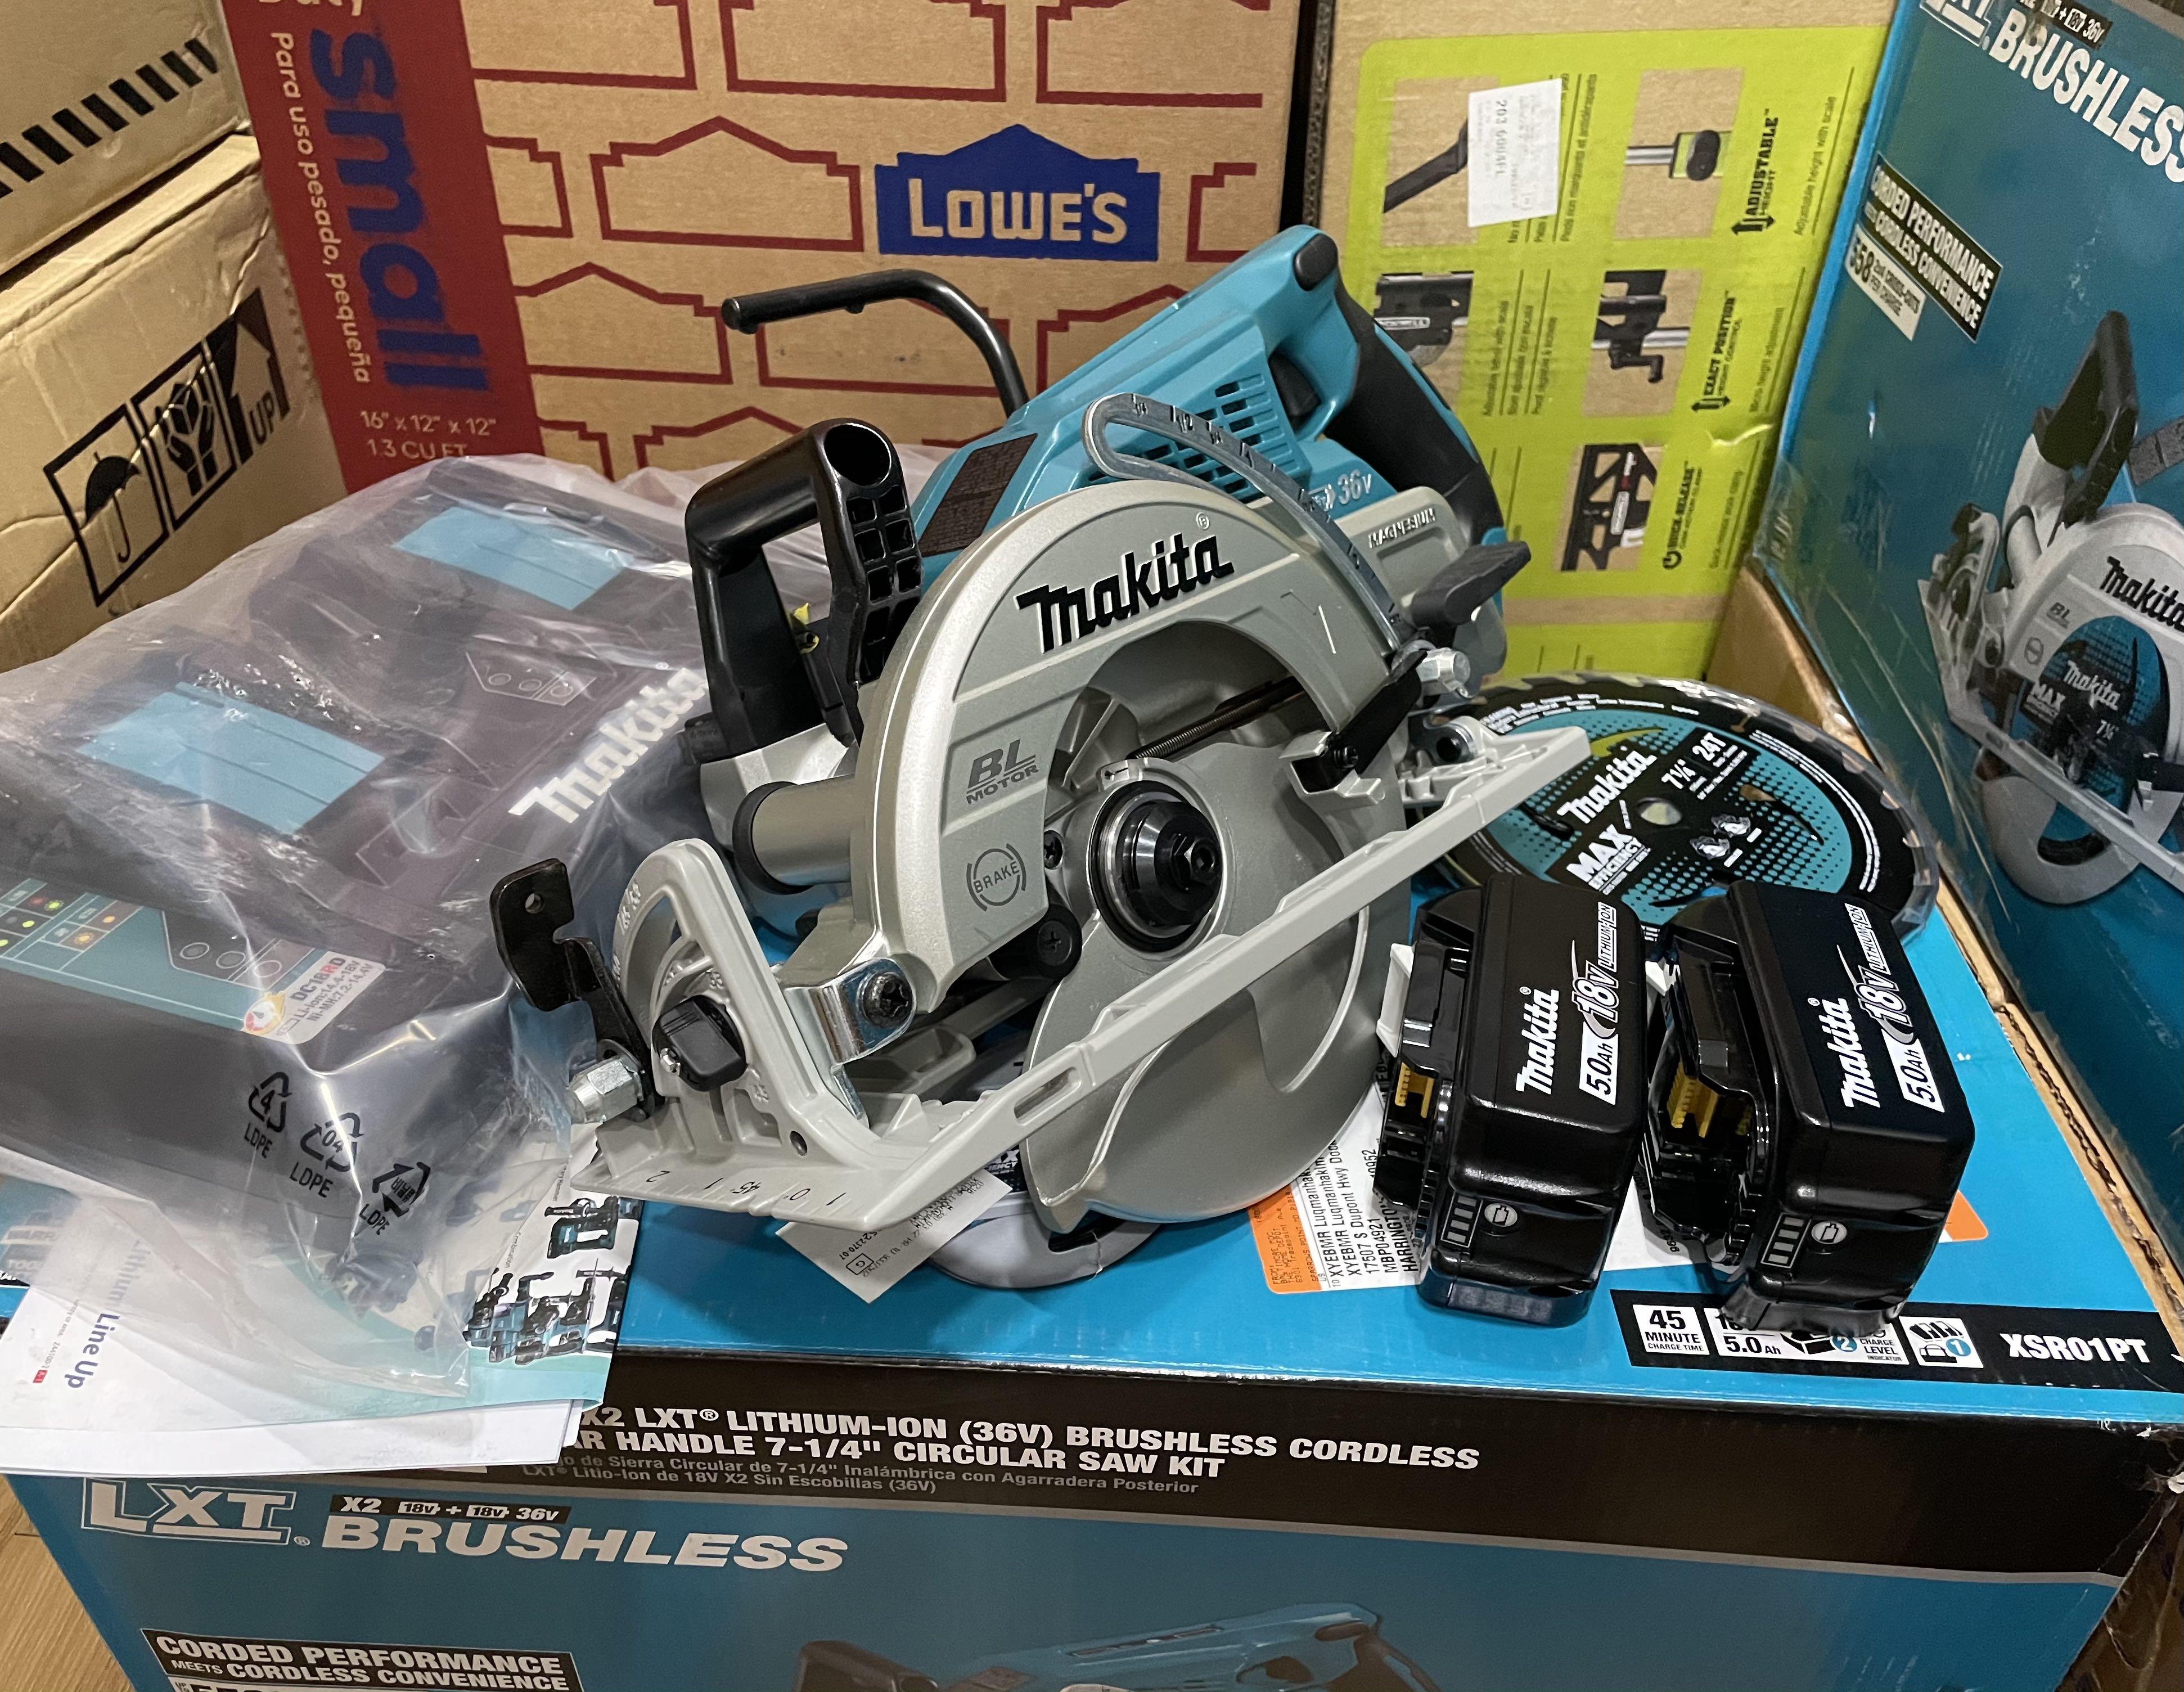 Makita Circular Saw 36v (18-Volt X2 LXT 5.0Ah Lithium-Ion) Brushless  Cordless Rear Handle 7-1/4 in. Circular Saw Kit, Furniture  Home Living,  Home Improvement  Organisation, Home Improvement Tools  Accessories on